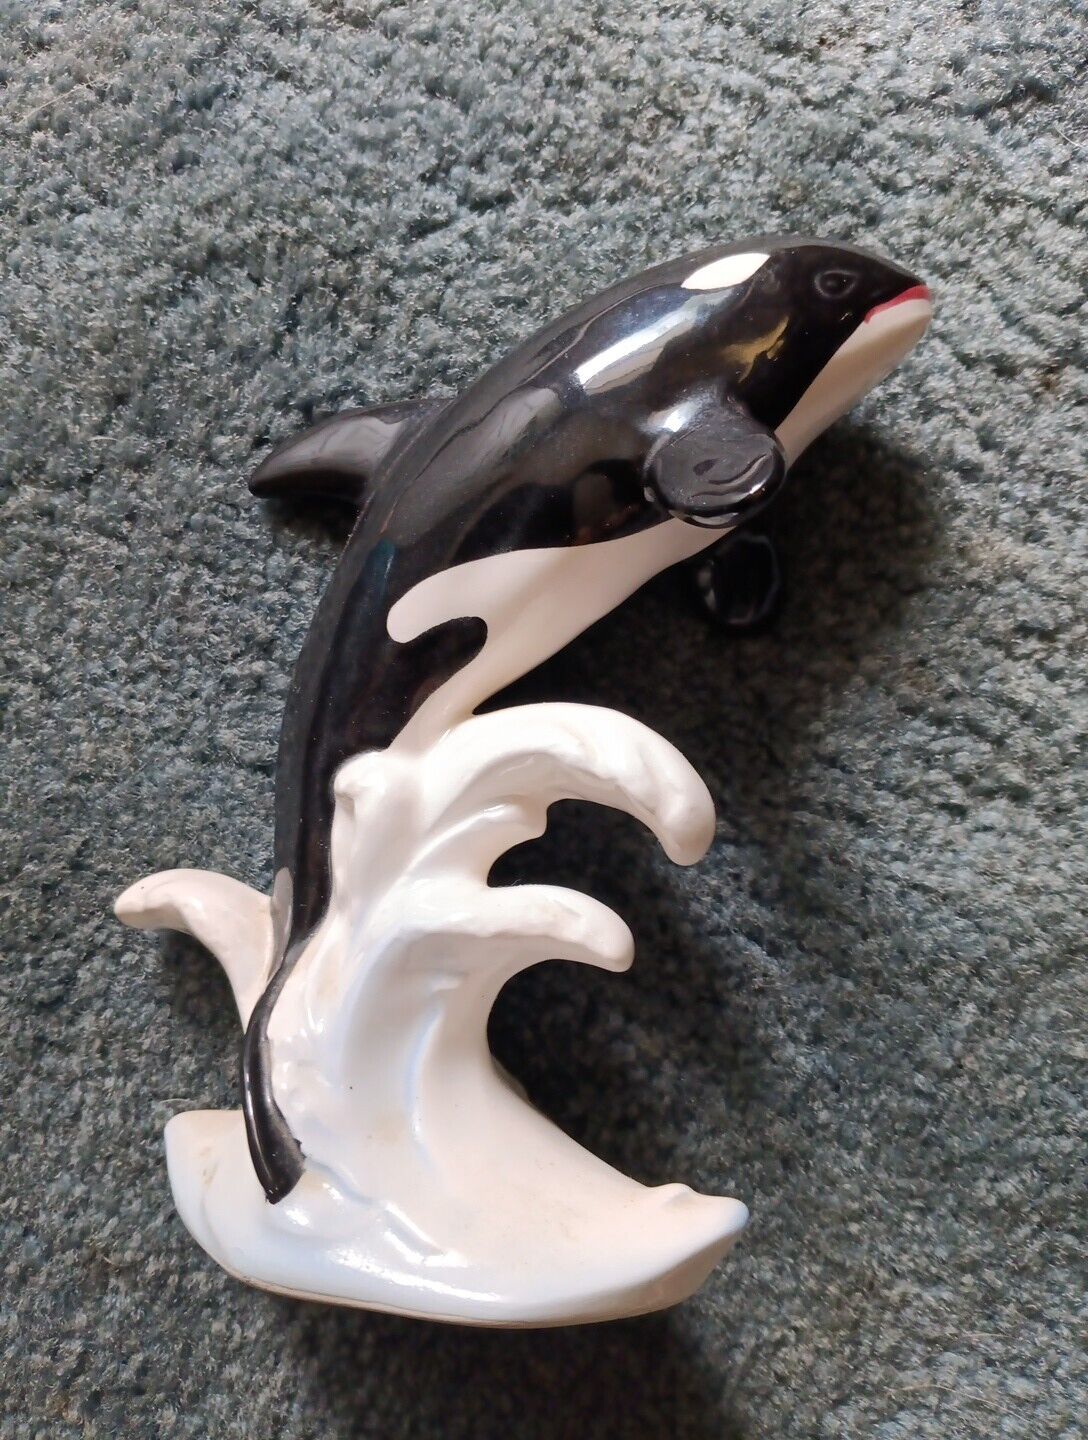 Rare Vintage Mid Century Orca Killer Whale Figure Made In Japan.  6” Tall